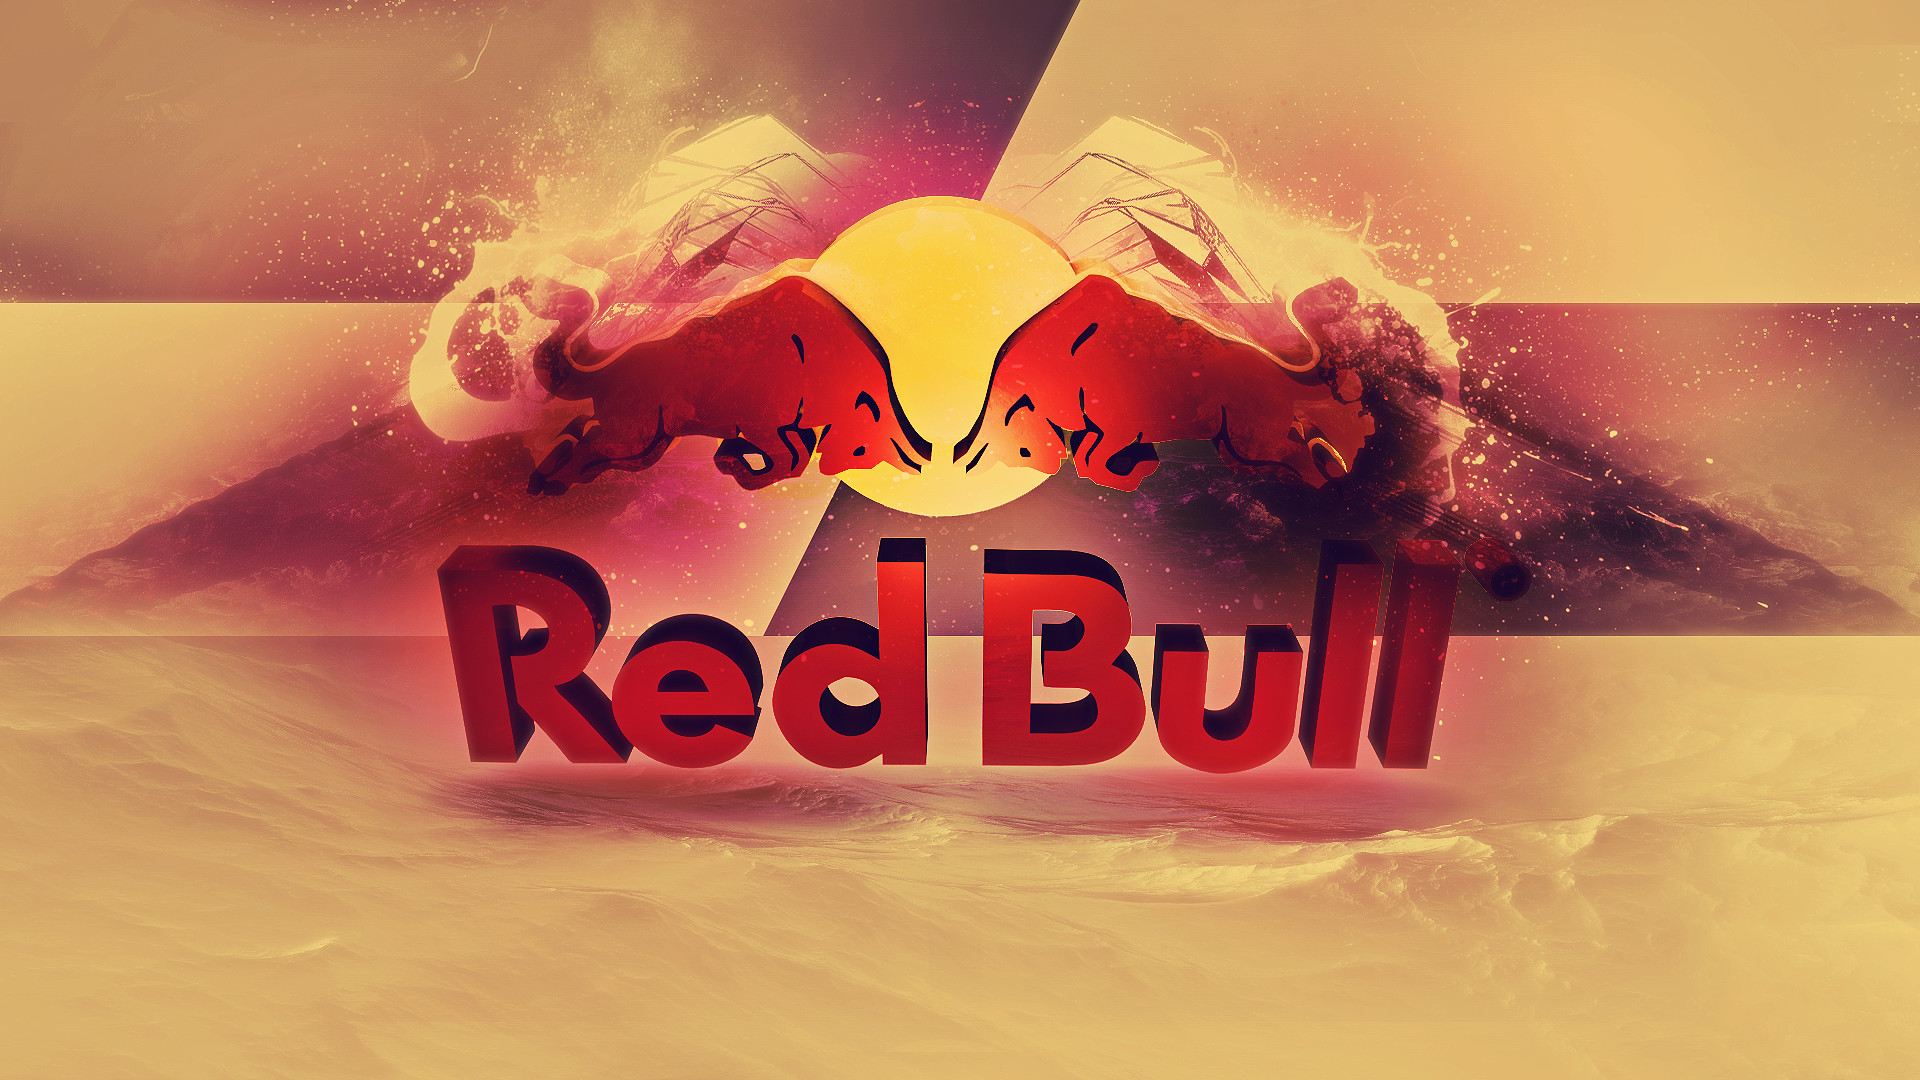 1920x1080 Abstract Red Bull Wallpaper 17891